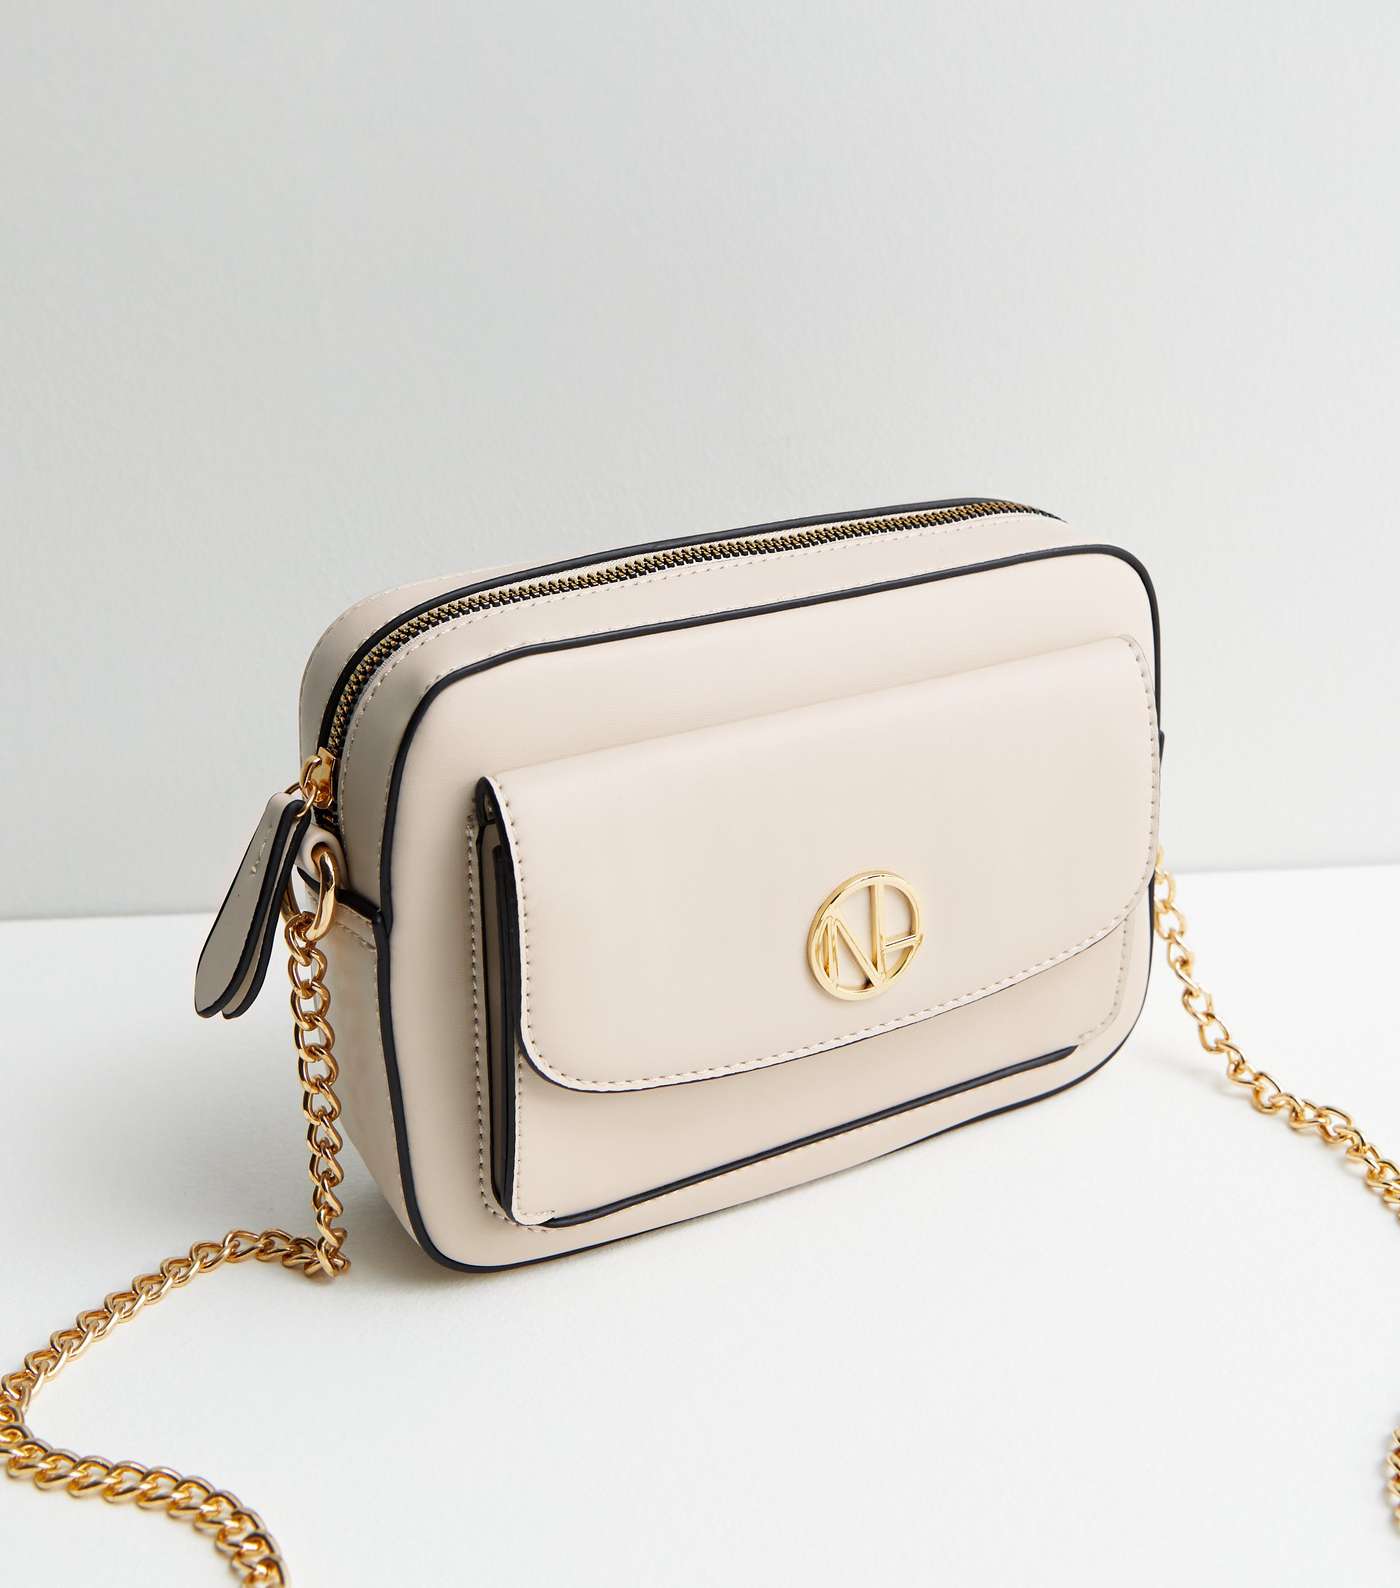 Cream Leather-Look Pocket Front Cross Body Bag Image 3